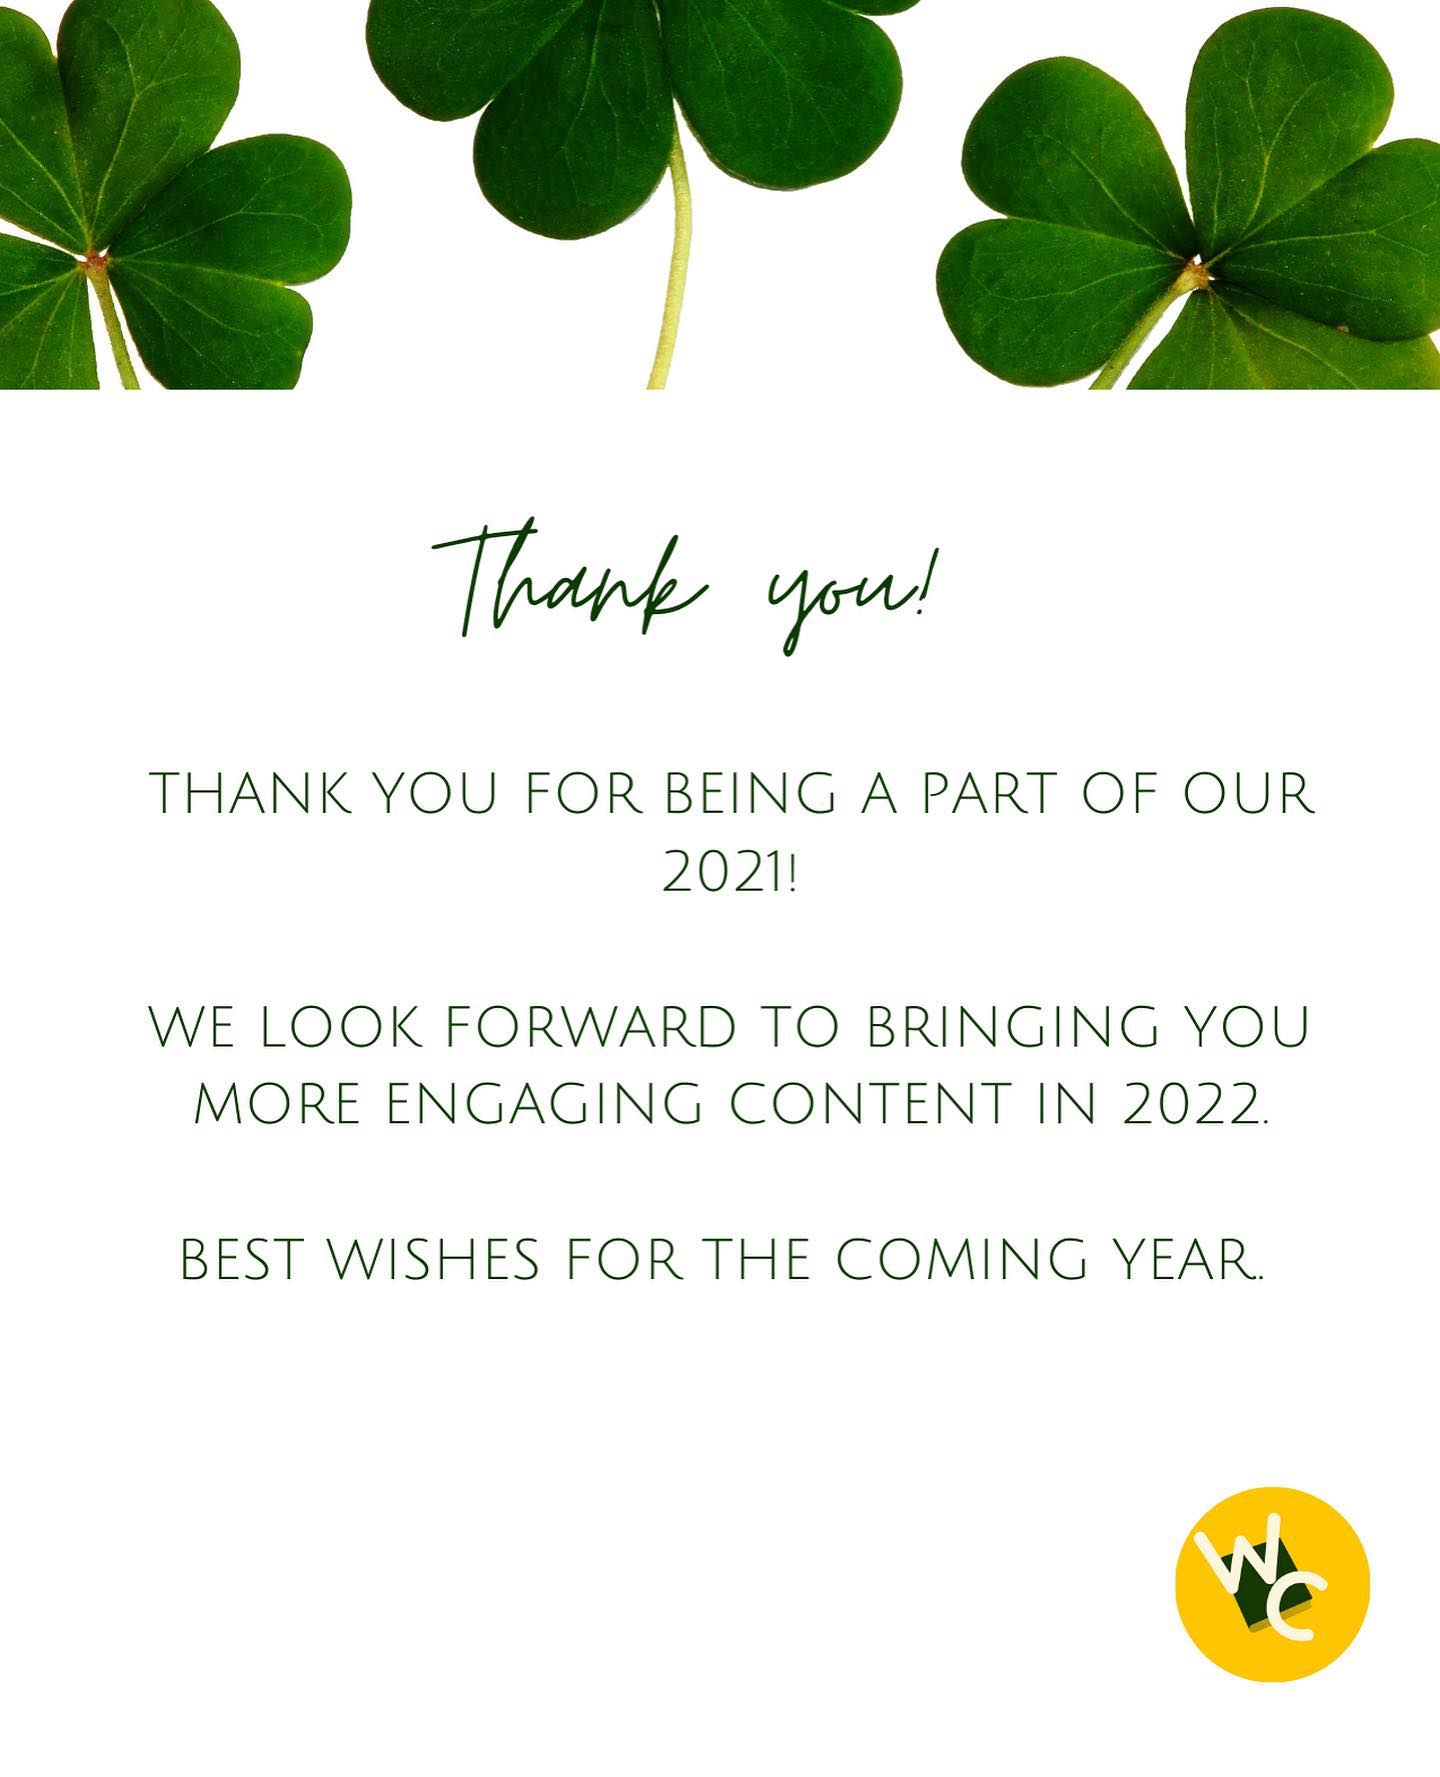 Thank you for 2021! 

It’s going to be busier around here in 2022, and we can’t wait to bring you more exciting content. 

Have a joyful, Christmas season and a wonderful new year. 

#editing #writing #businesswriting #fictionwriting #wordcaps